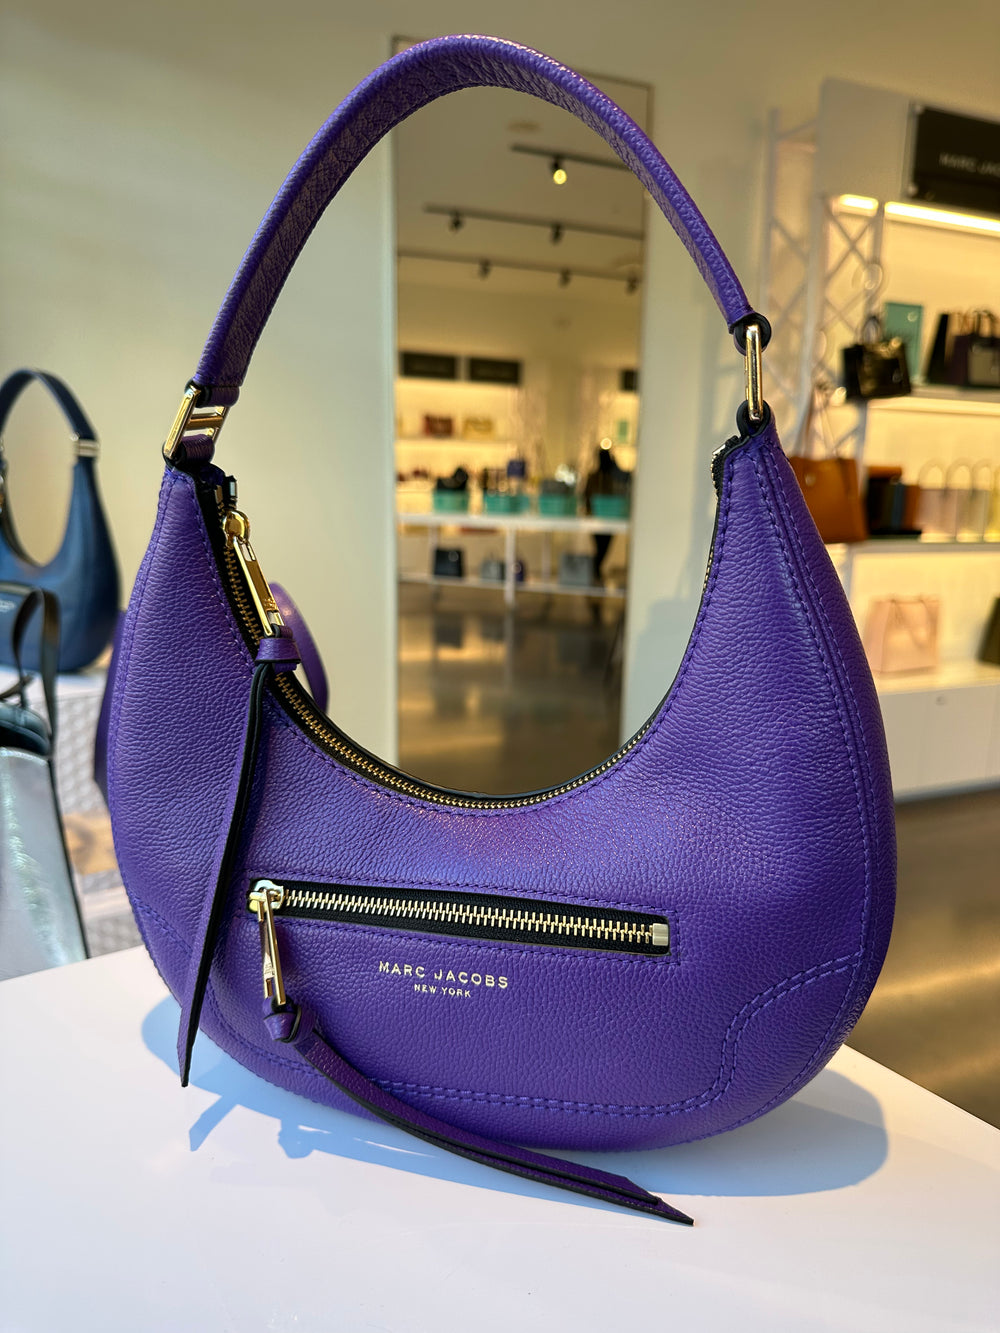 Marc Jacobs Pillow Leather Crossbody Bag in Blue